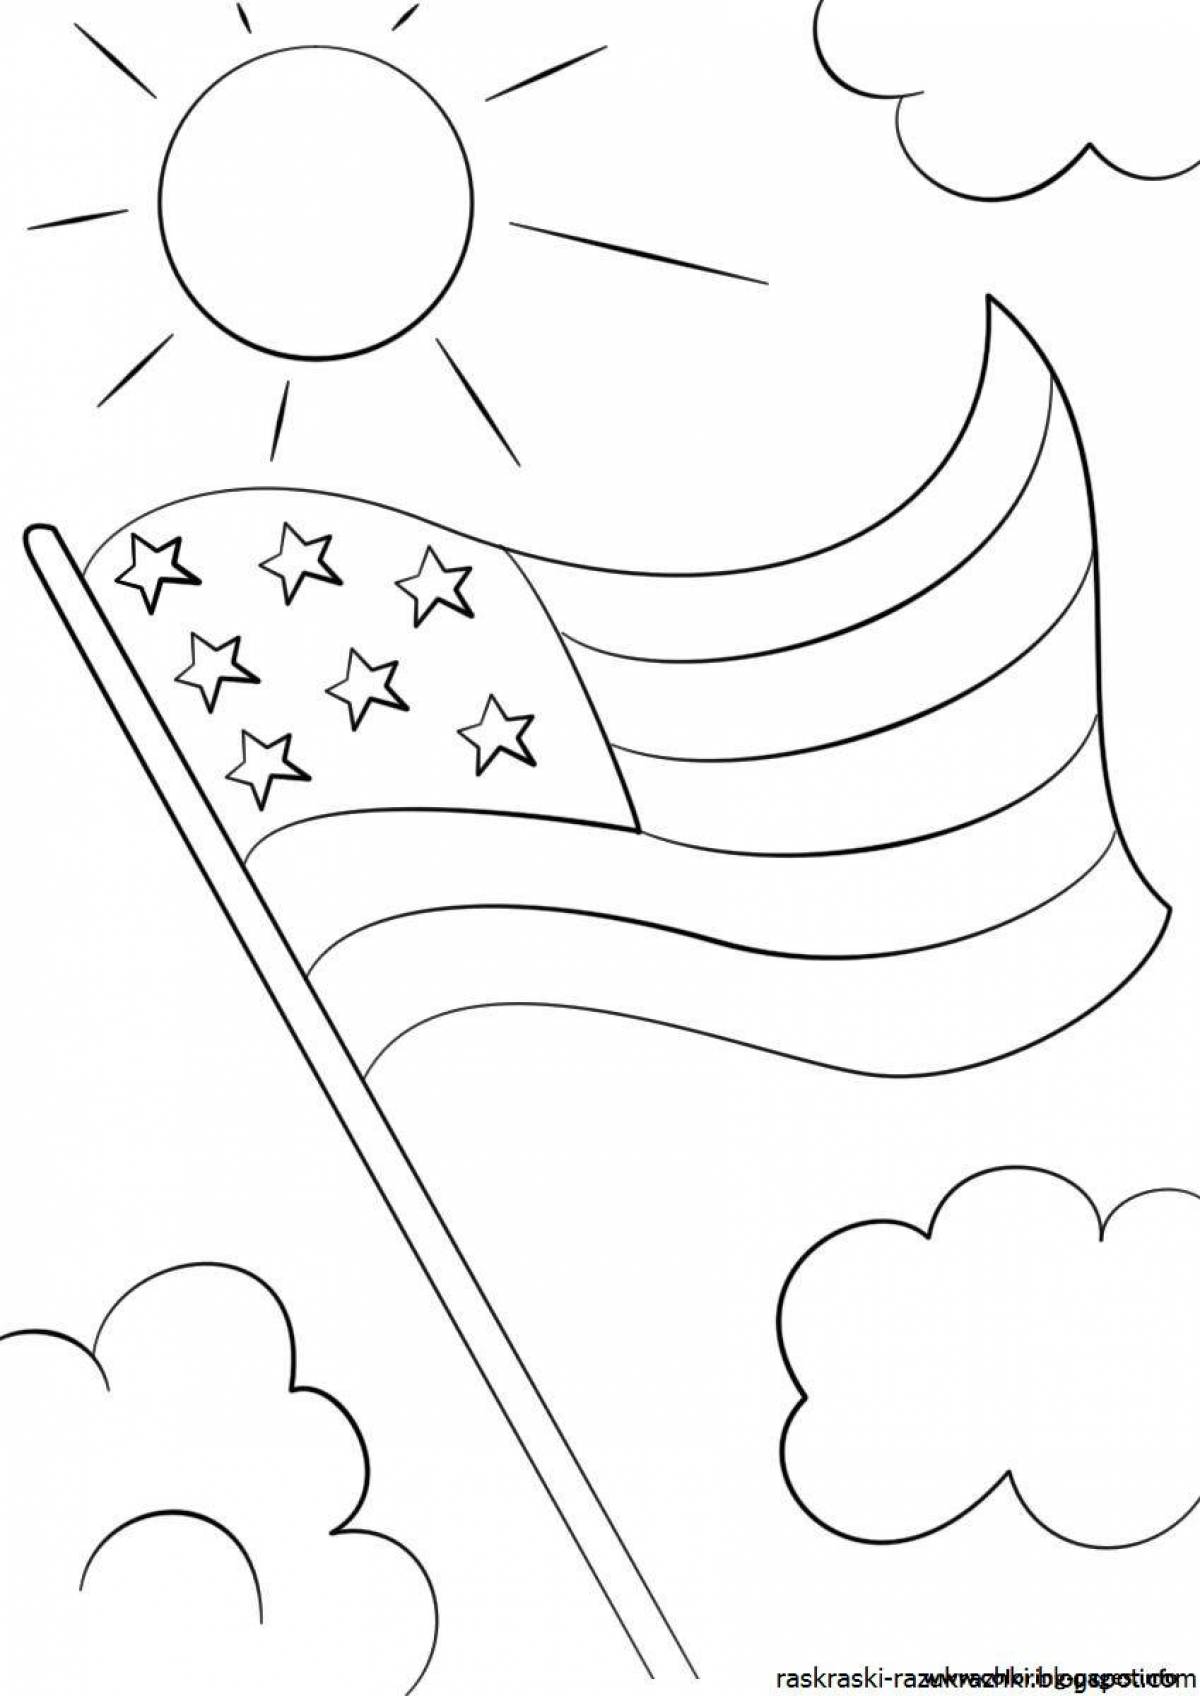 Luxury russian flag coloring page